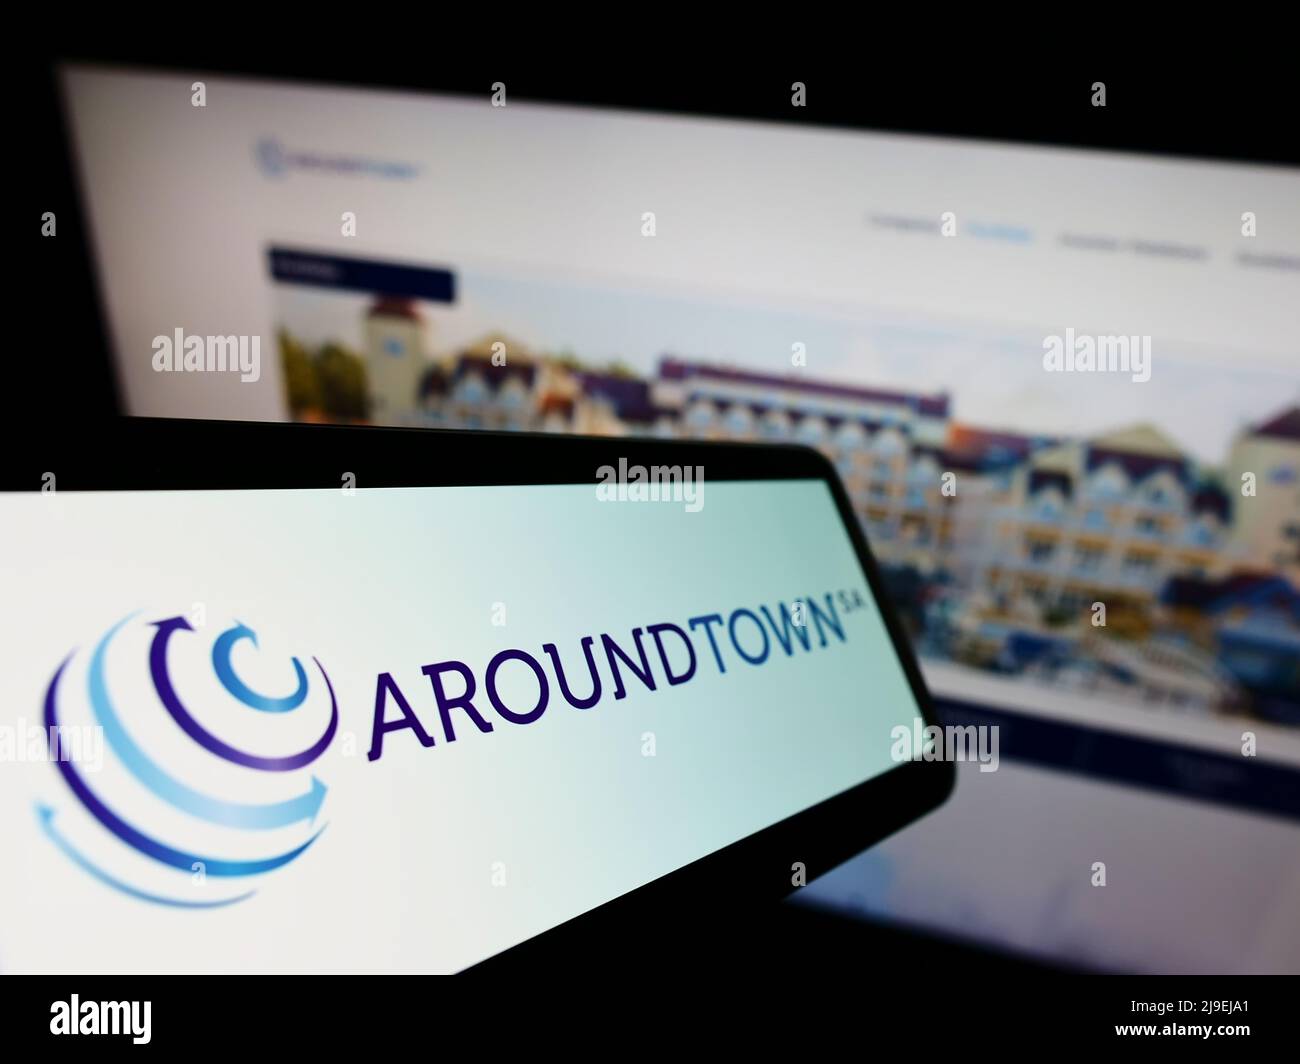 Cellphone with logo of real estate company Aroundtown SA on screen in front of business website. Focus on center of phone display. Stock Photo